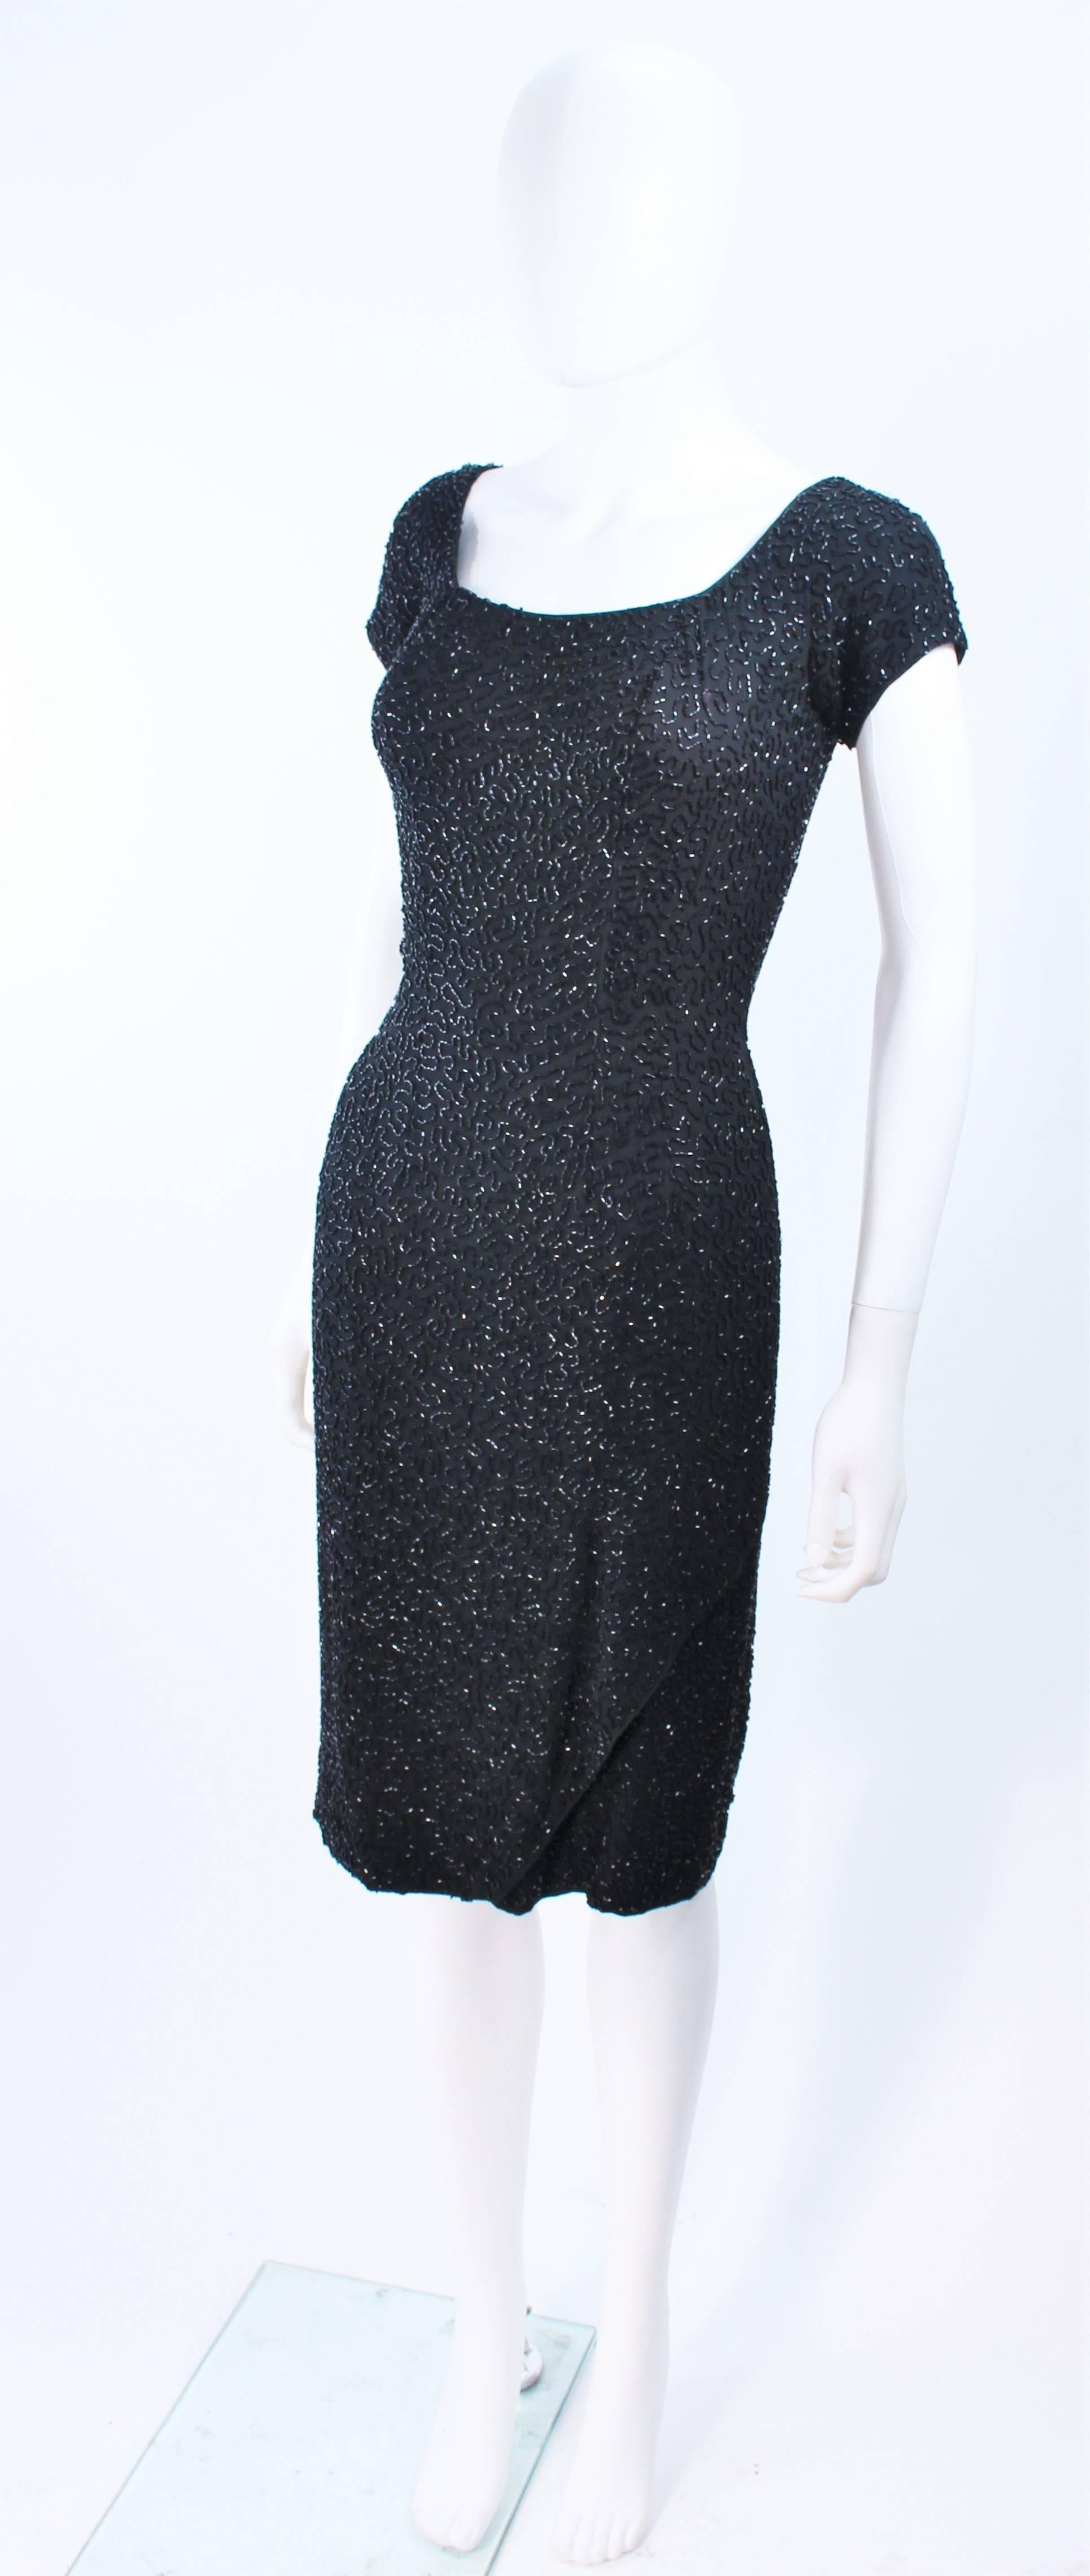 CEIL CHAPMAN 1960's Black Hand Beaded Silk Cocktail Dress with Drape Size 4  For Sale 1